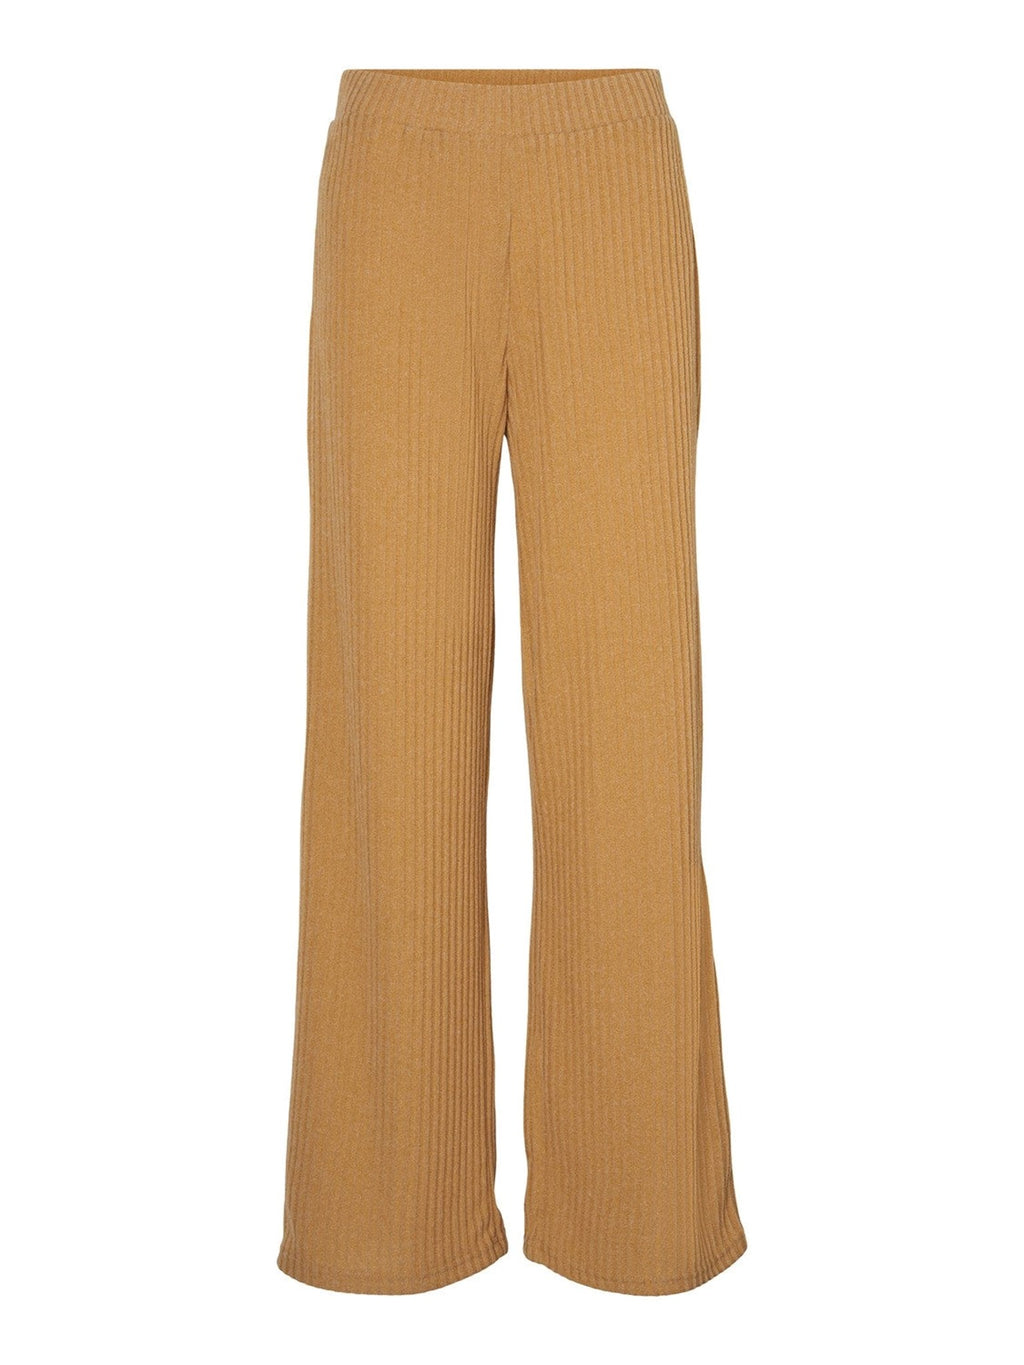 Blossom Trousers - Beige